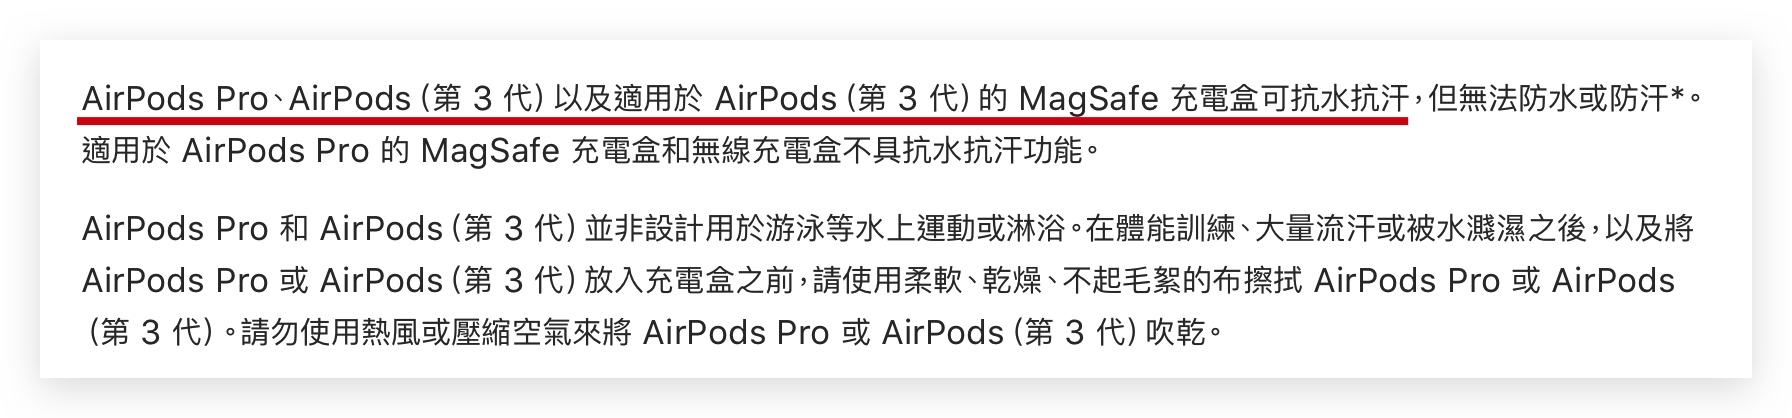 AirPods Pro 2 H2 晶片